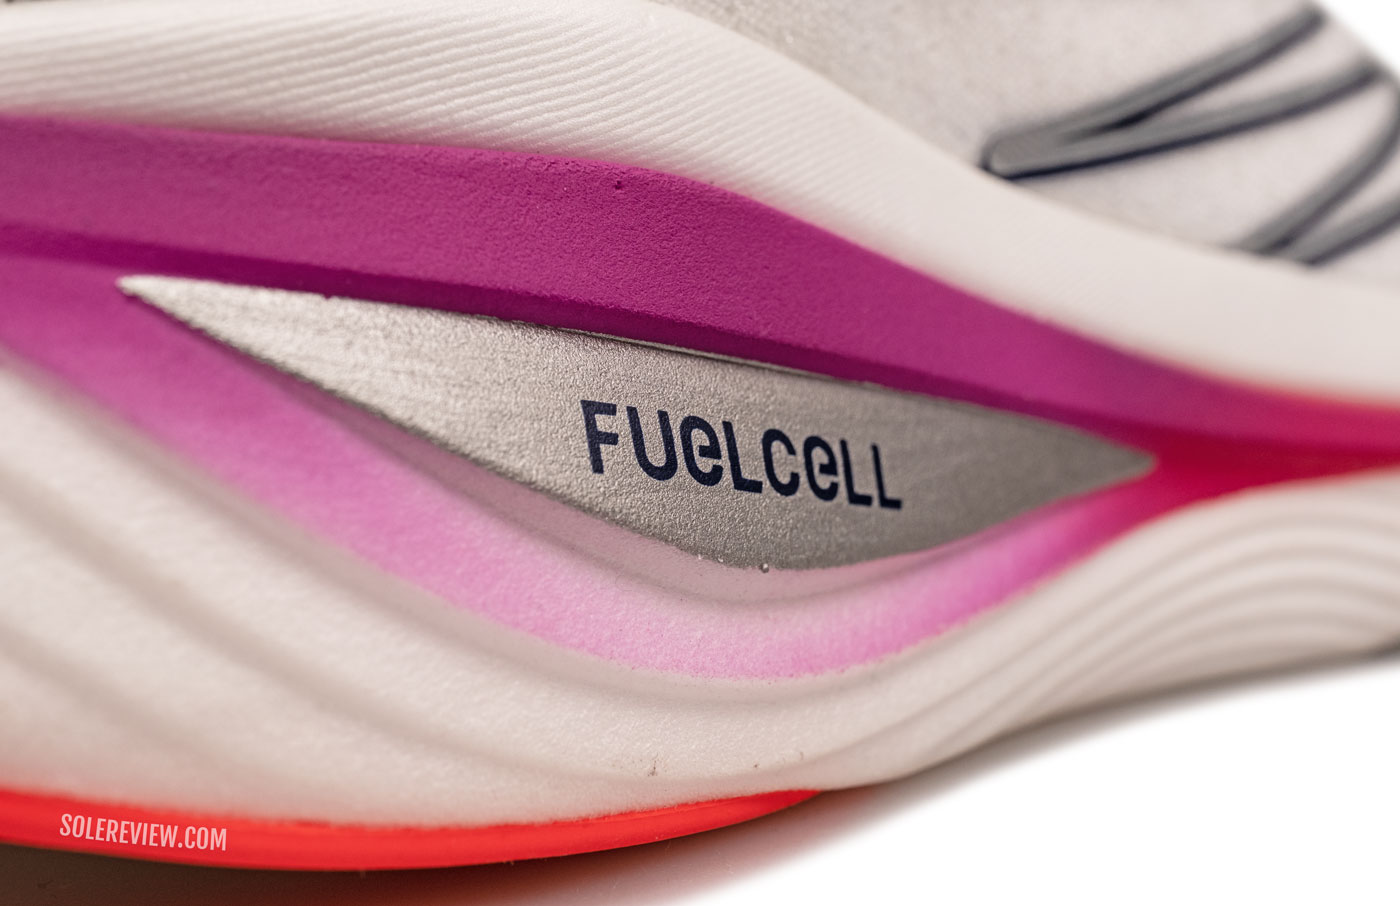 The Fuelcell foam of the New Balance SC Elite V3.